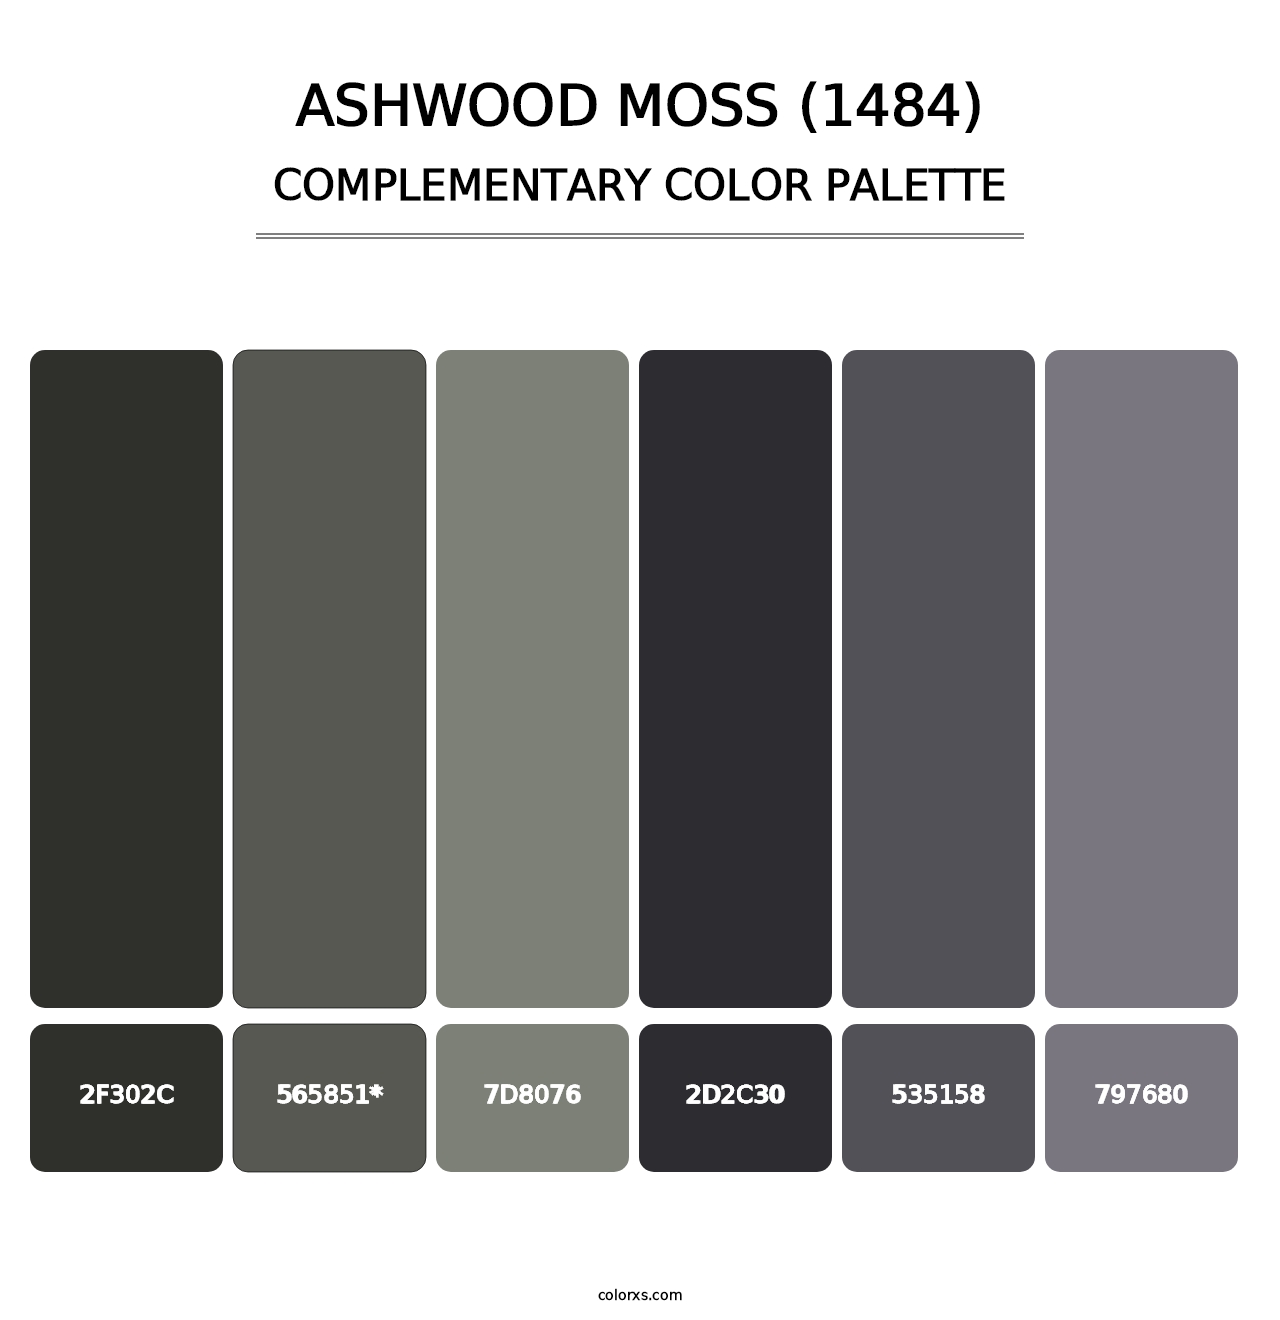 Ashwood Moss (1484) - Complementary Color Palette